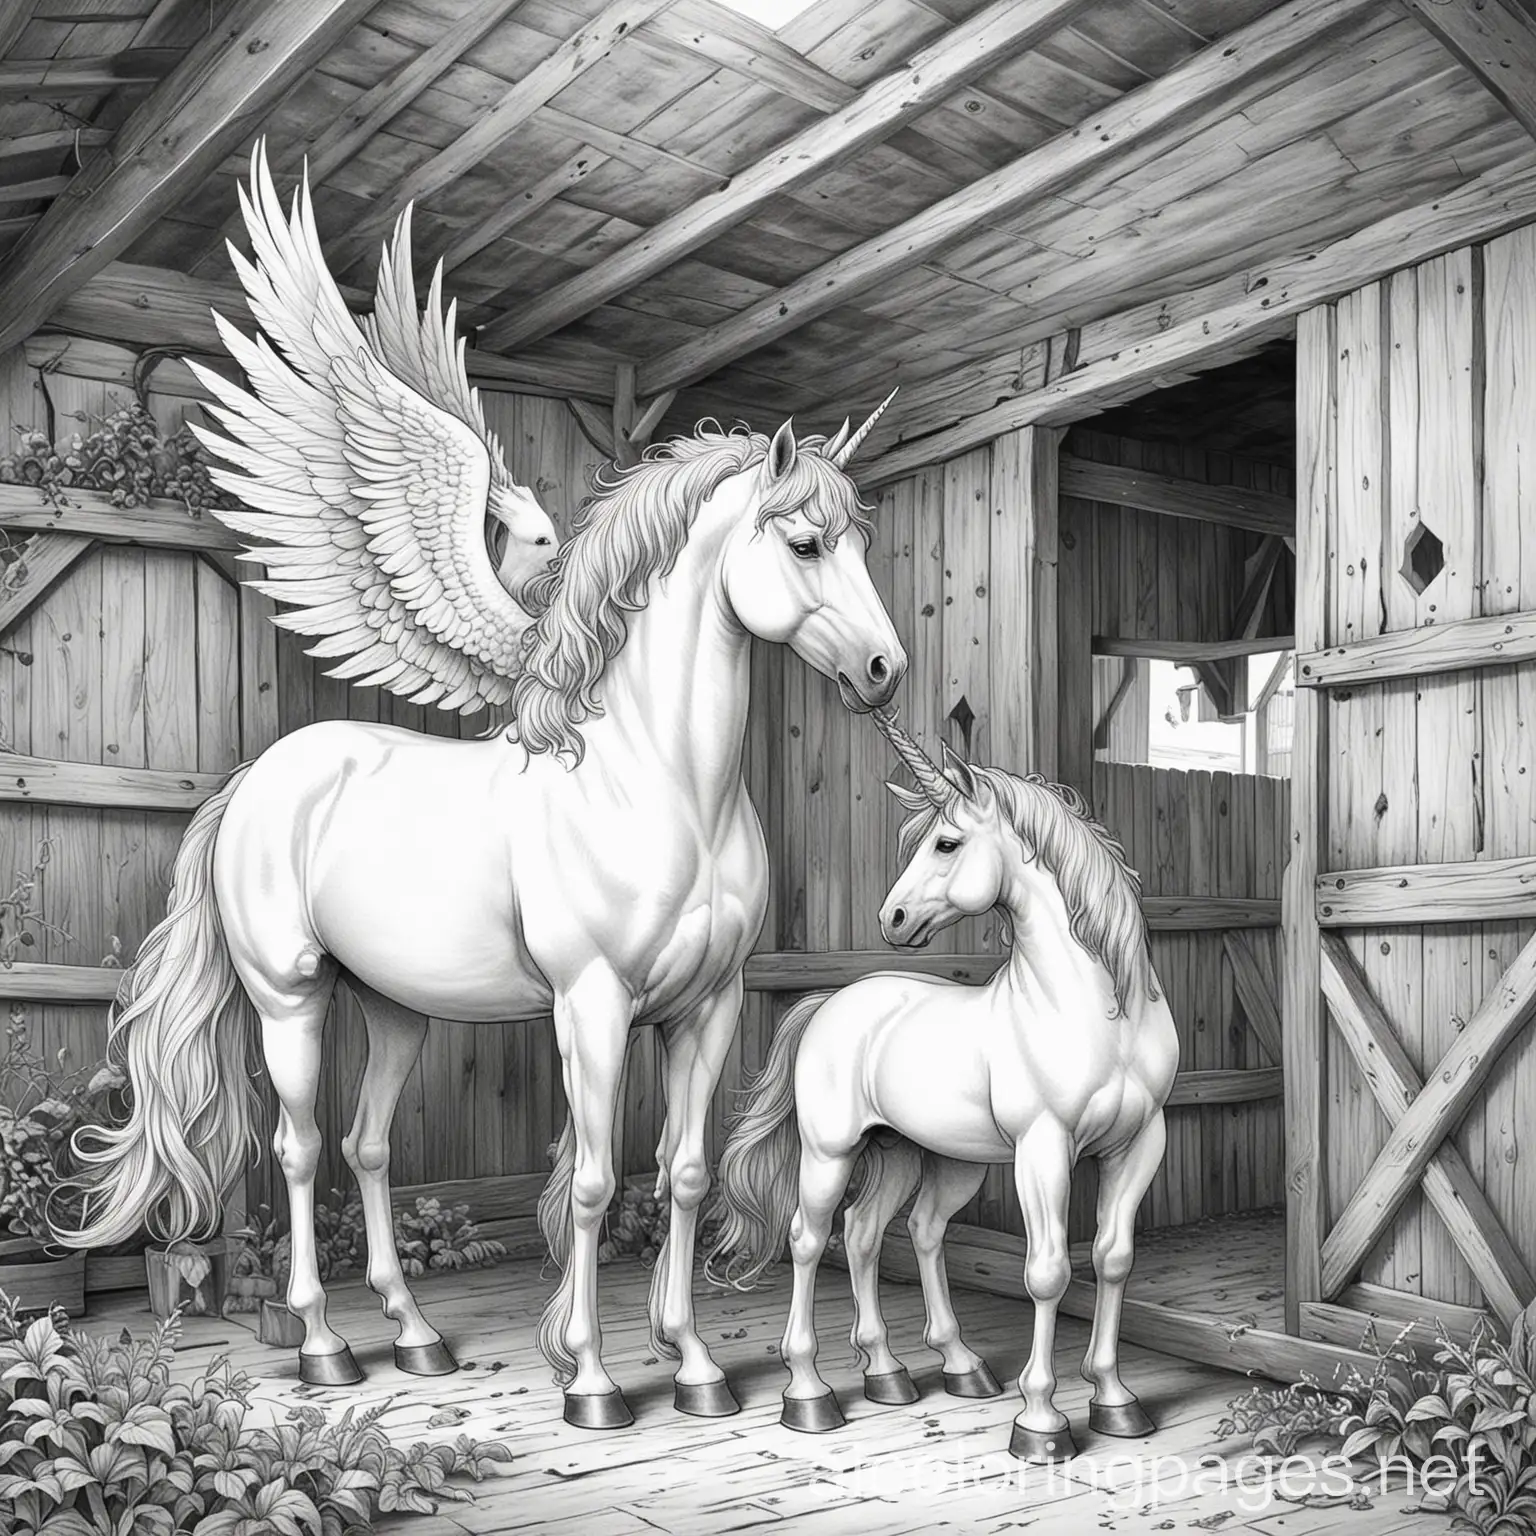 pegasus and a unicorn in a barn for coloring, Coloring Page, black and white, line art, white background, Simplicity, Ample White Space. The background of the coloring page is plain white to make it easy for young children to color within the lines. The outlines of all the subjects are easy to distinguish, making it simple for kids to color without too much difficulty